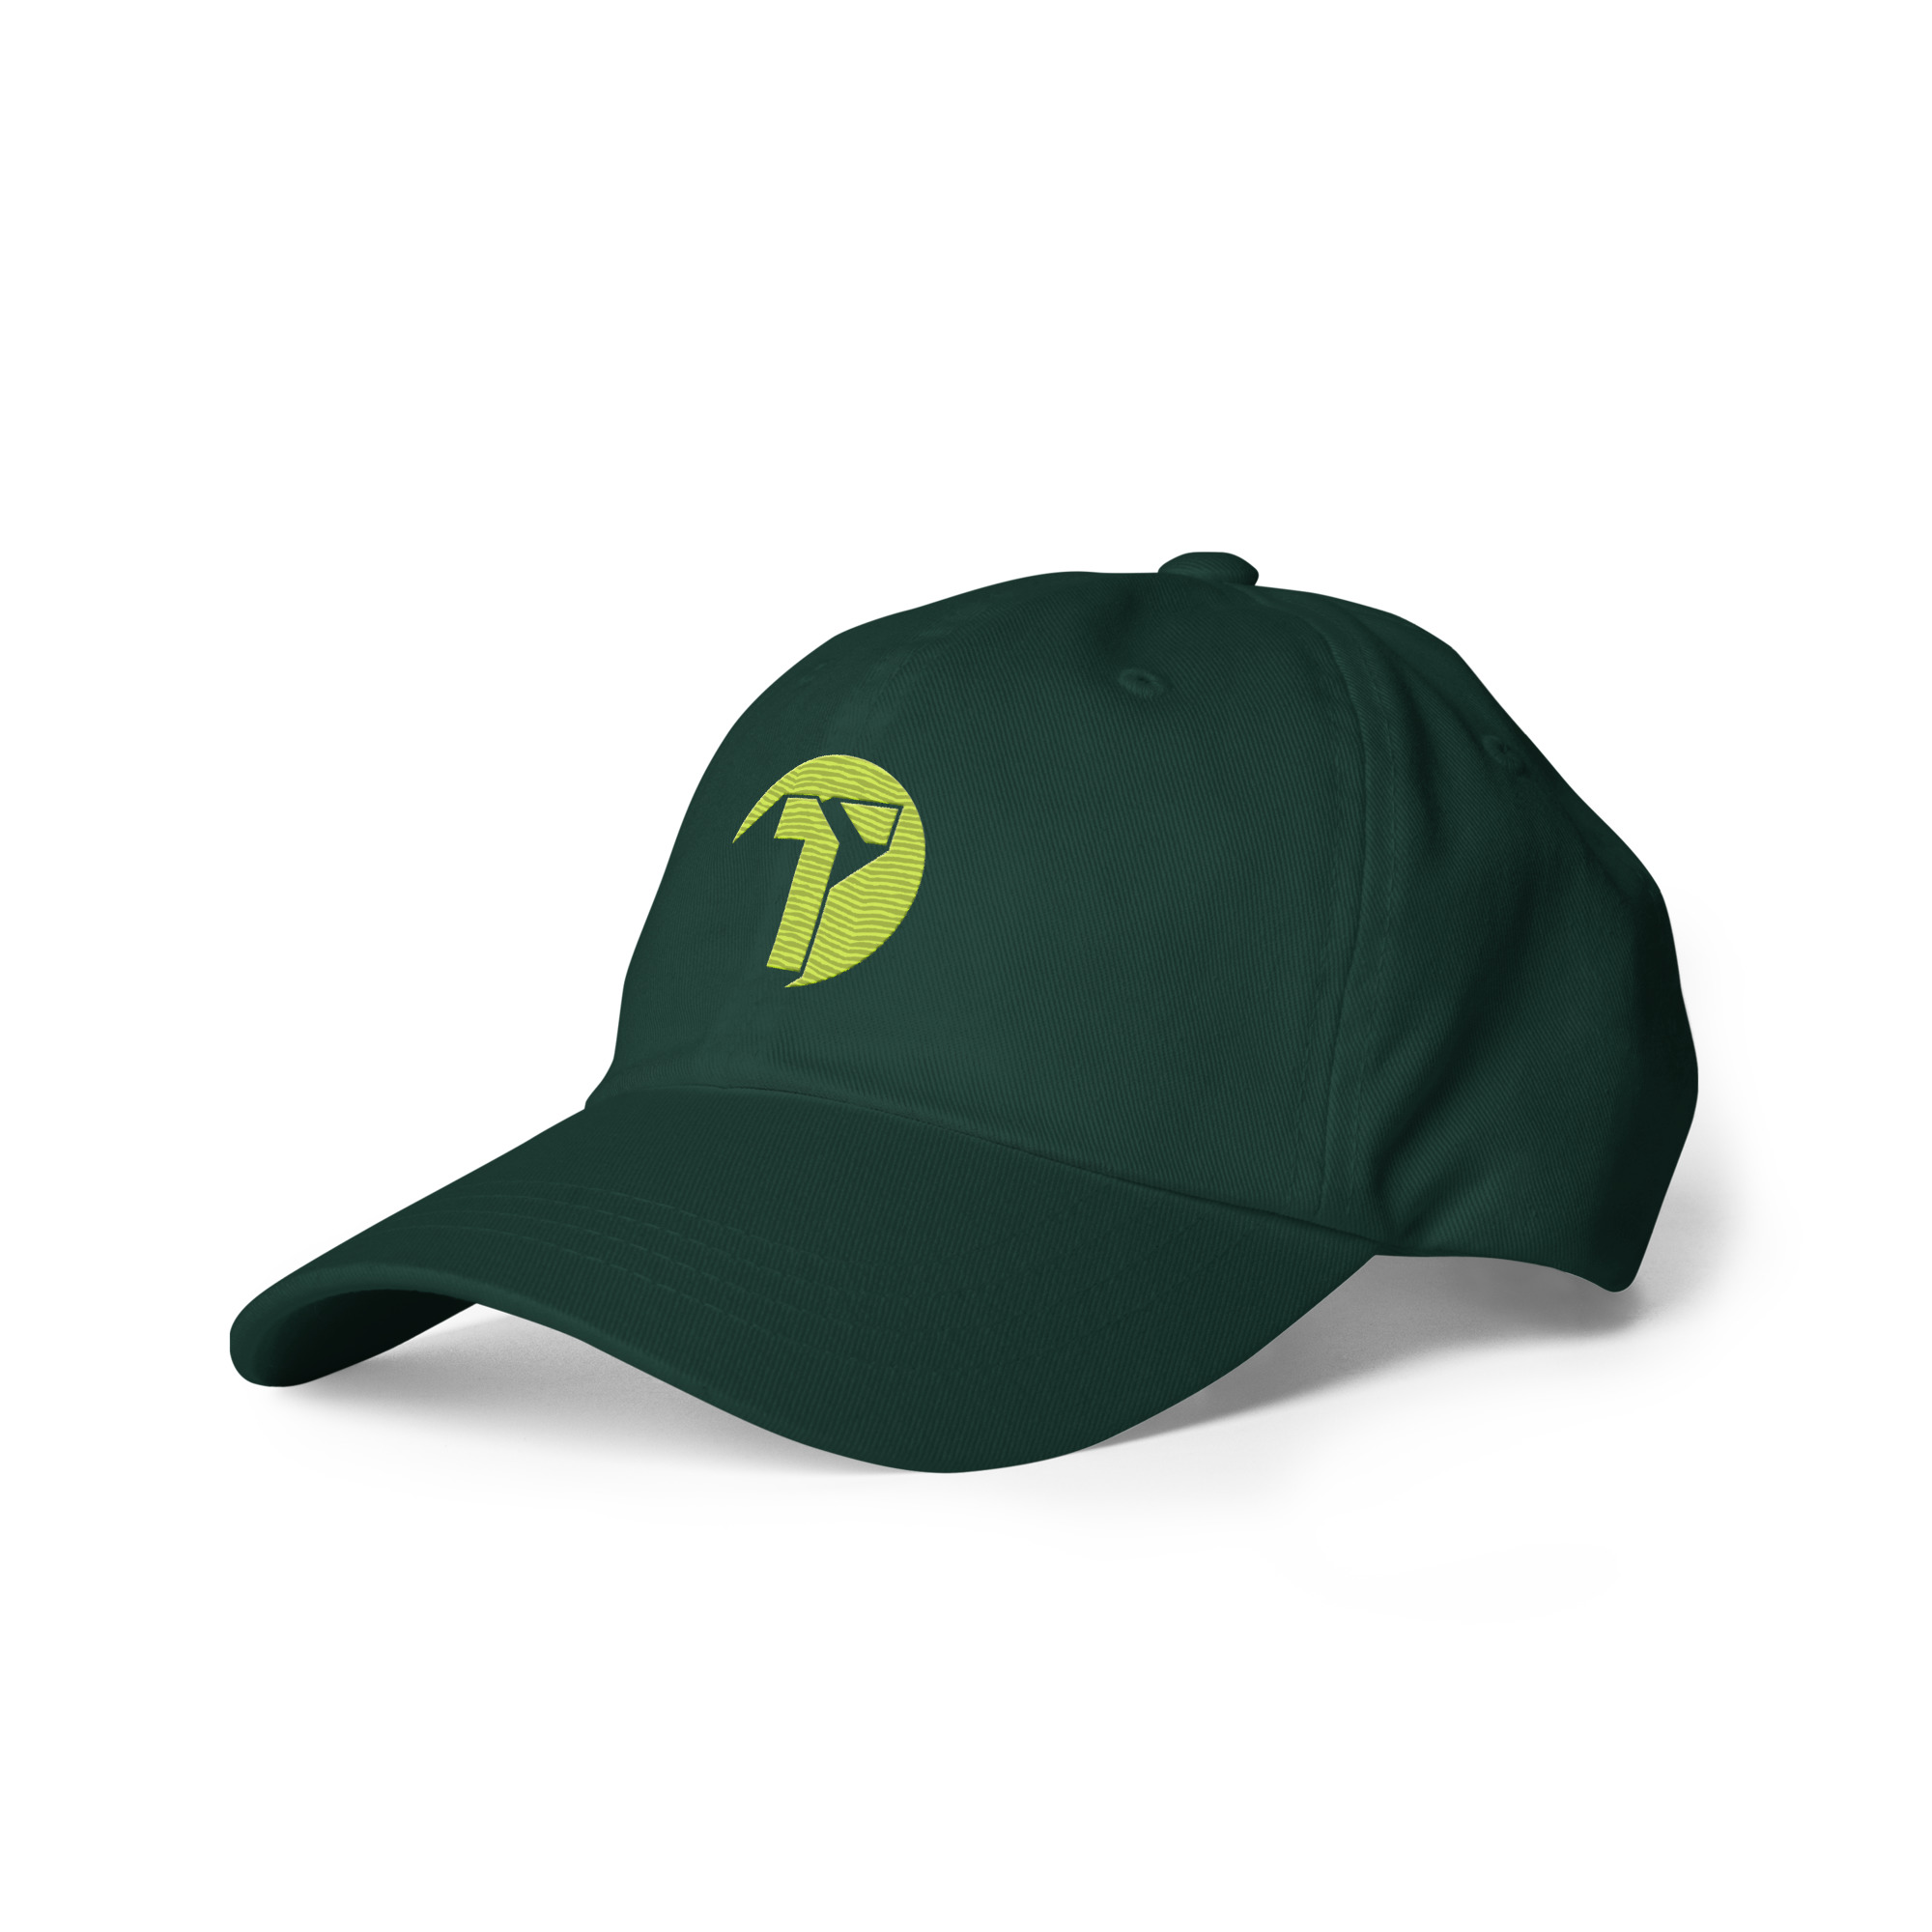 classic-dad-hat-spruce-left-front-64b70e39b34a8.jpg